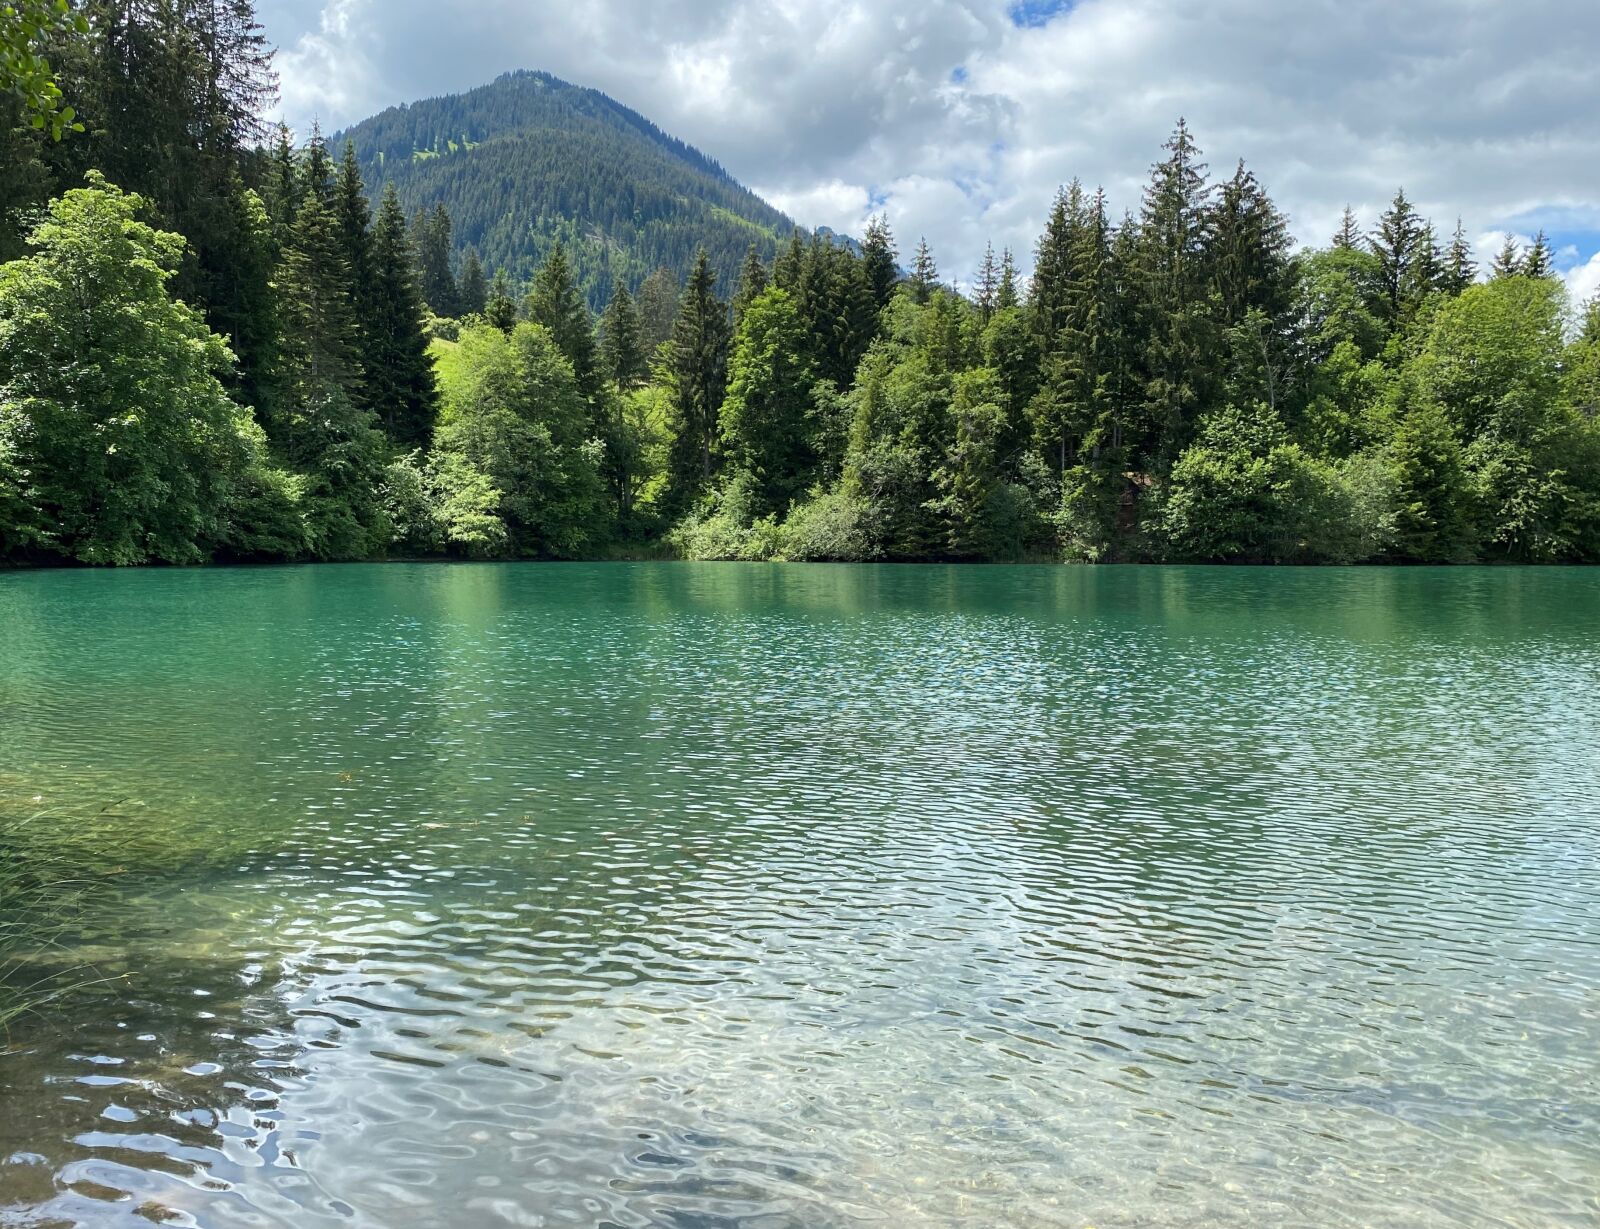 Apple iPhone 11 Pro Max sample photo. Bergsee, nature, hiking photography